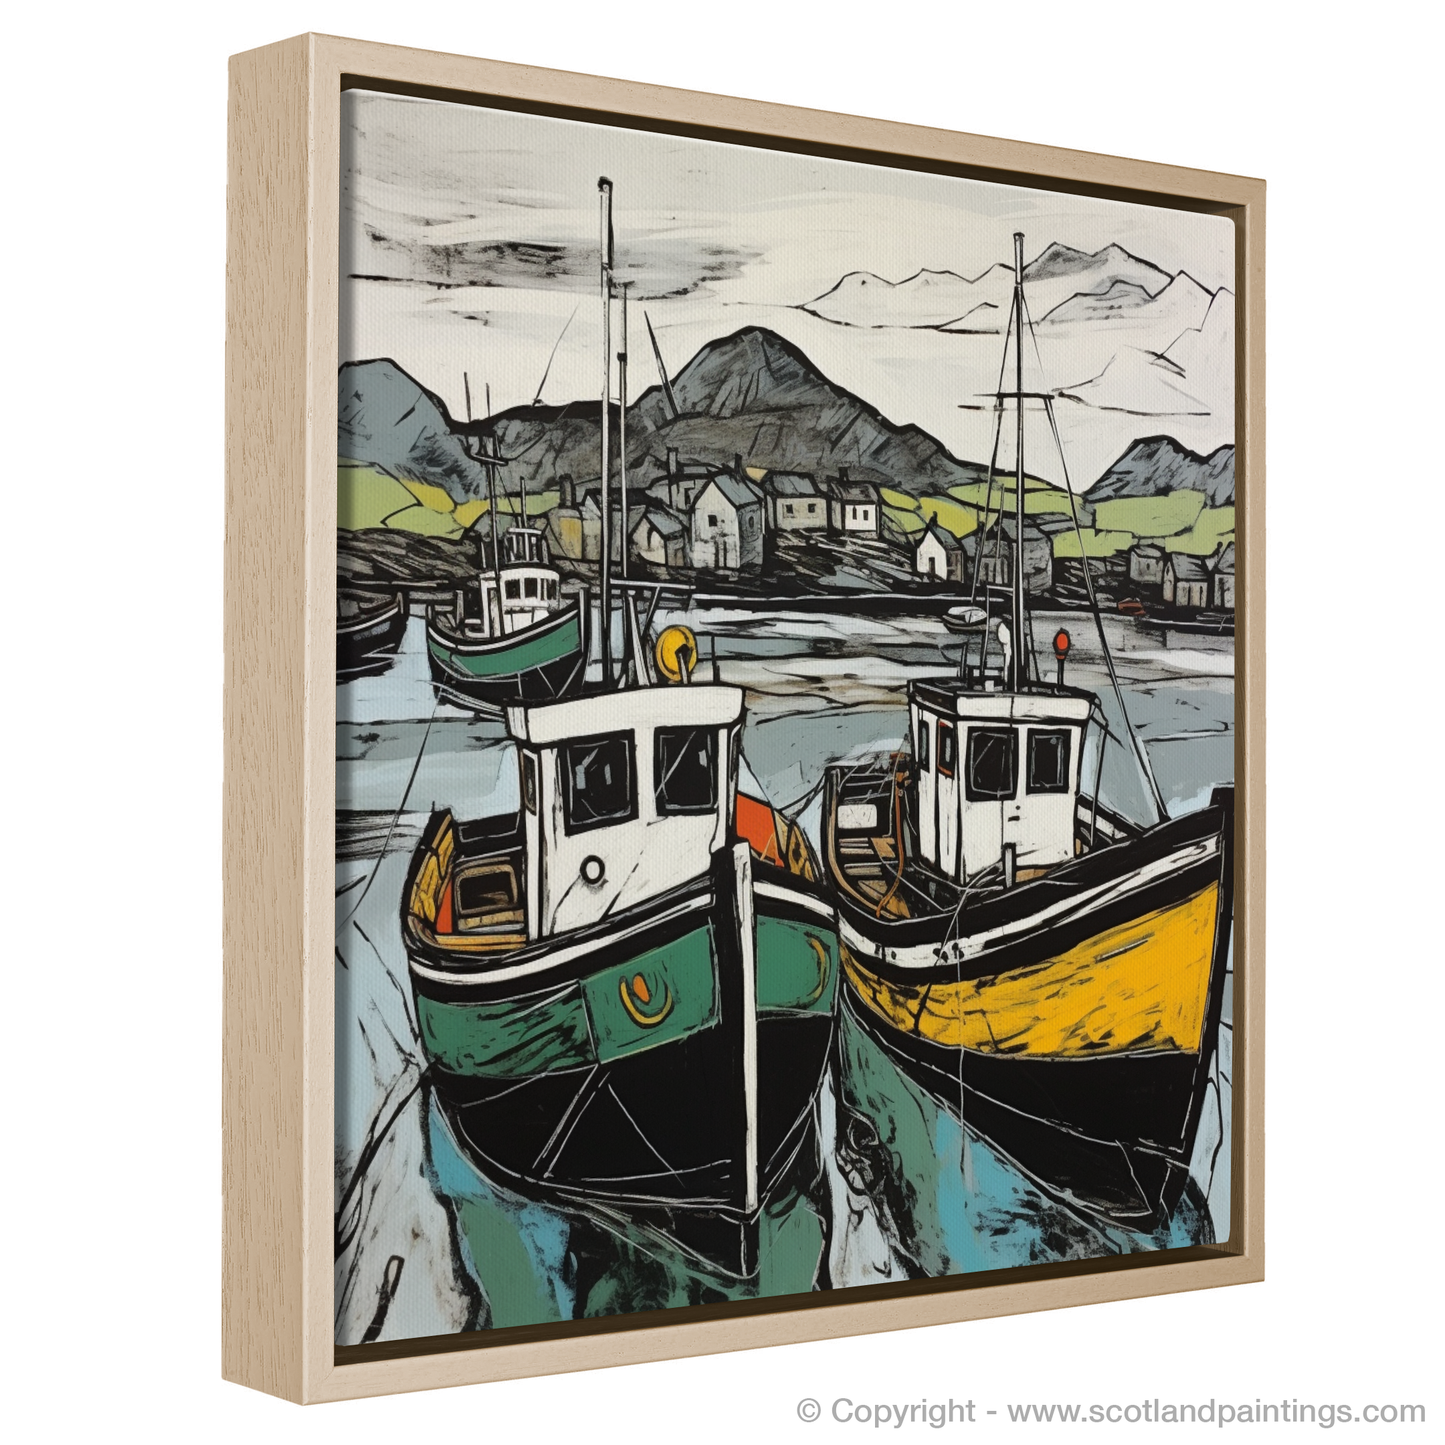 Painting and Art Print of Castlebay Harbour, Isle of Barra entitled "Harbour Hues: An Illustrative Expressionist Take on Castlebay, Isle of Barra".